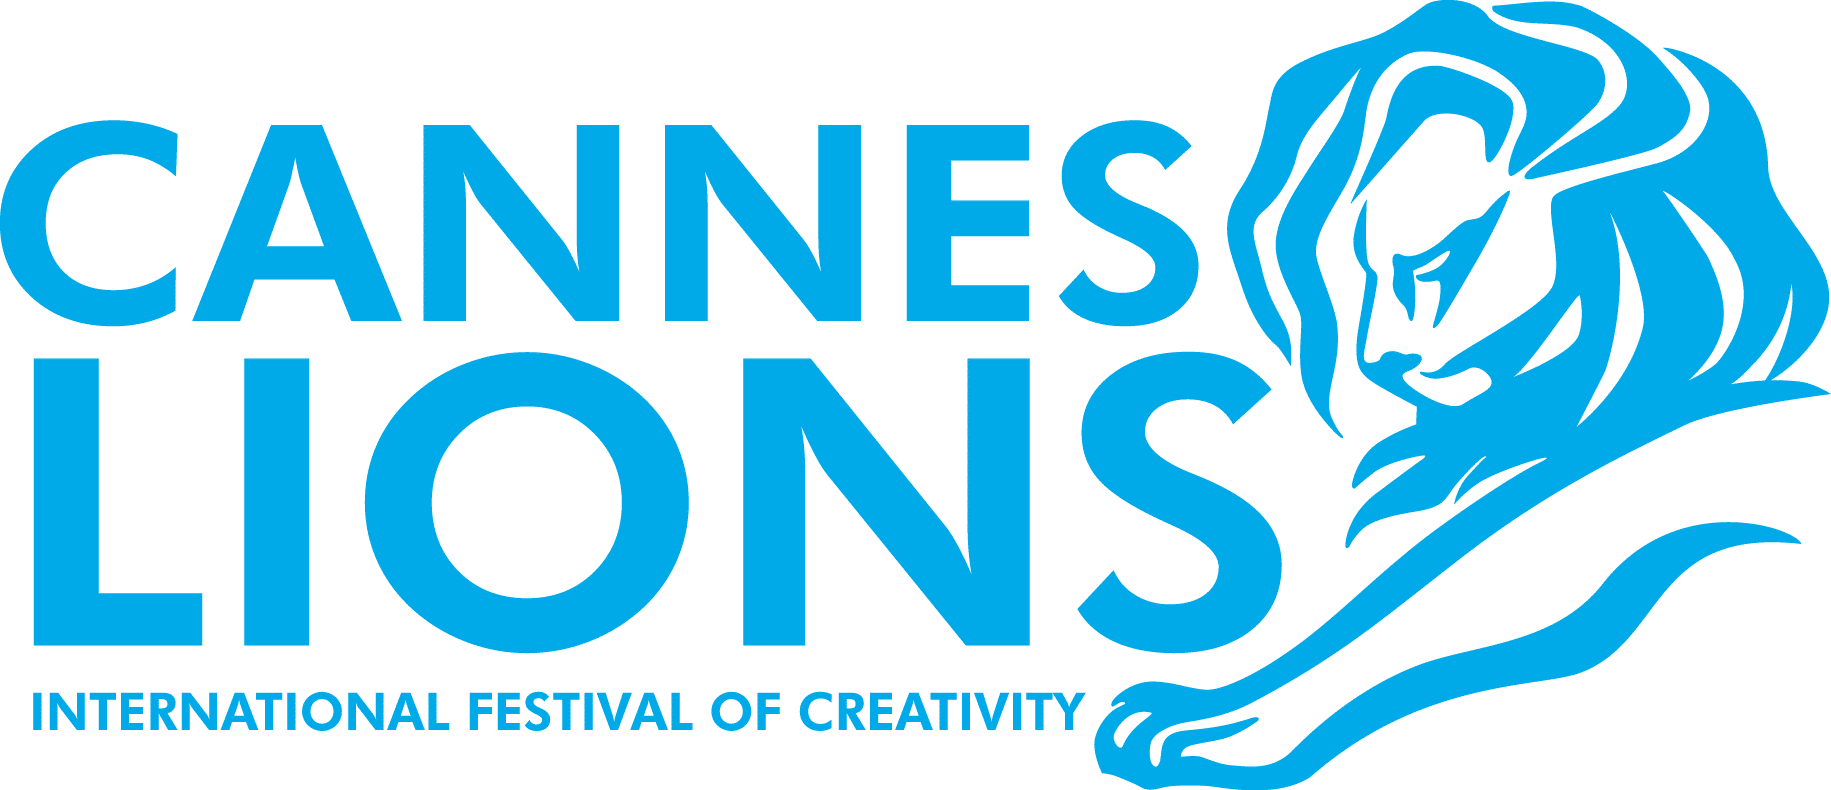 100 Days Till Cannes Lions 2016: Top Ten Quotes